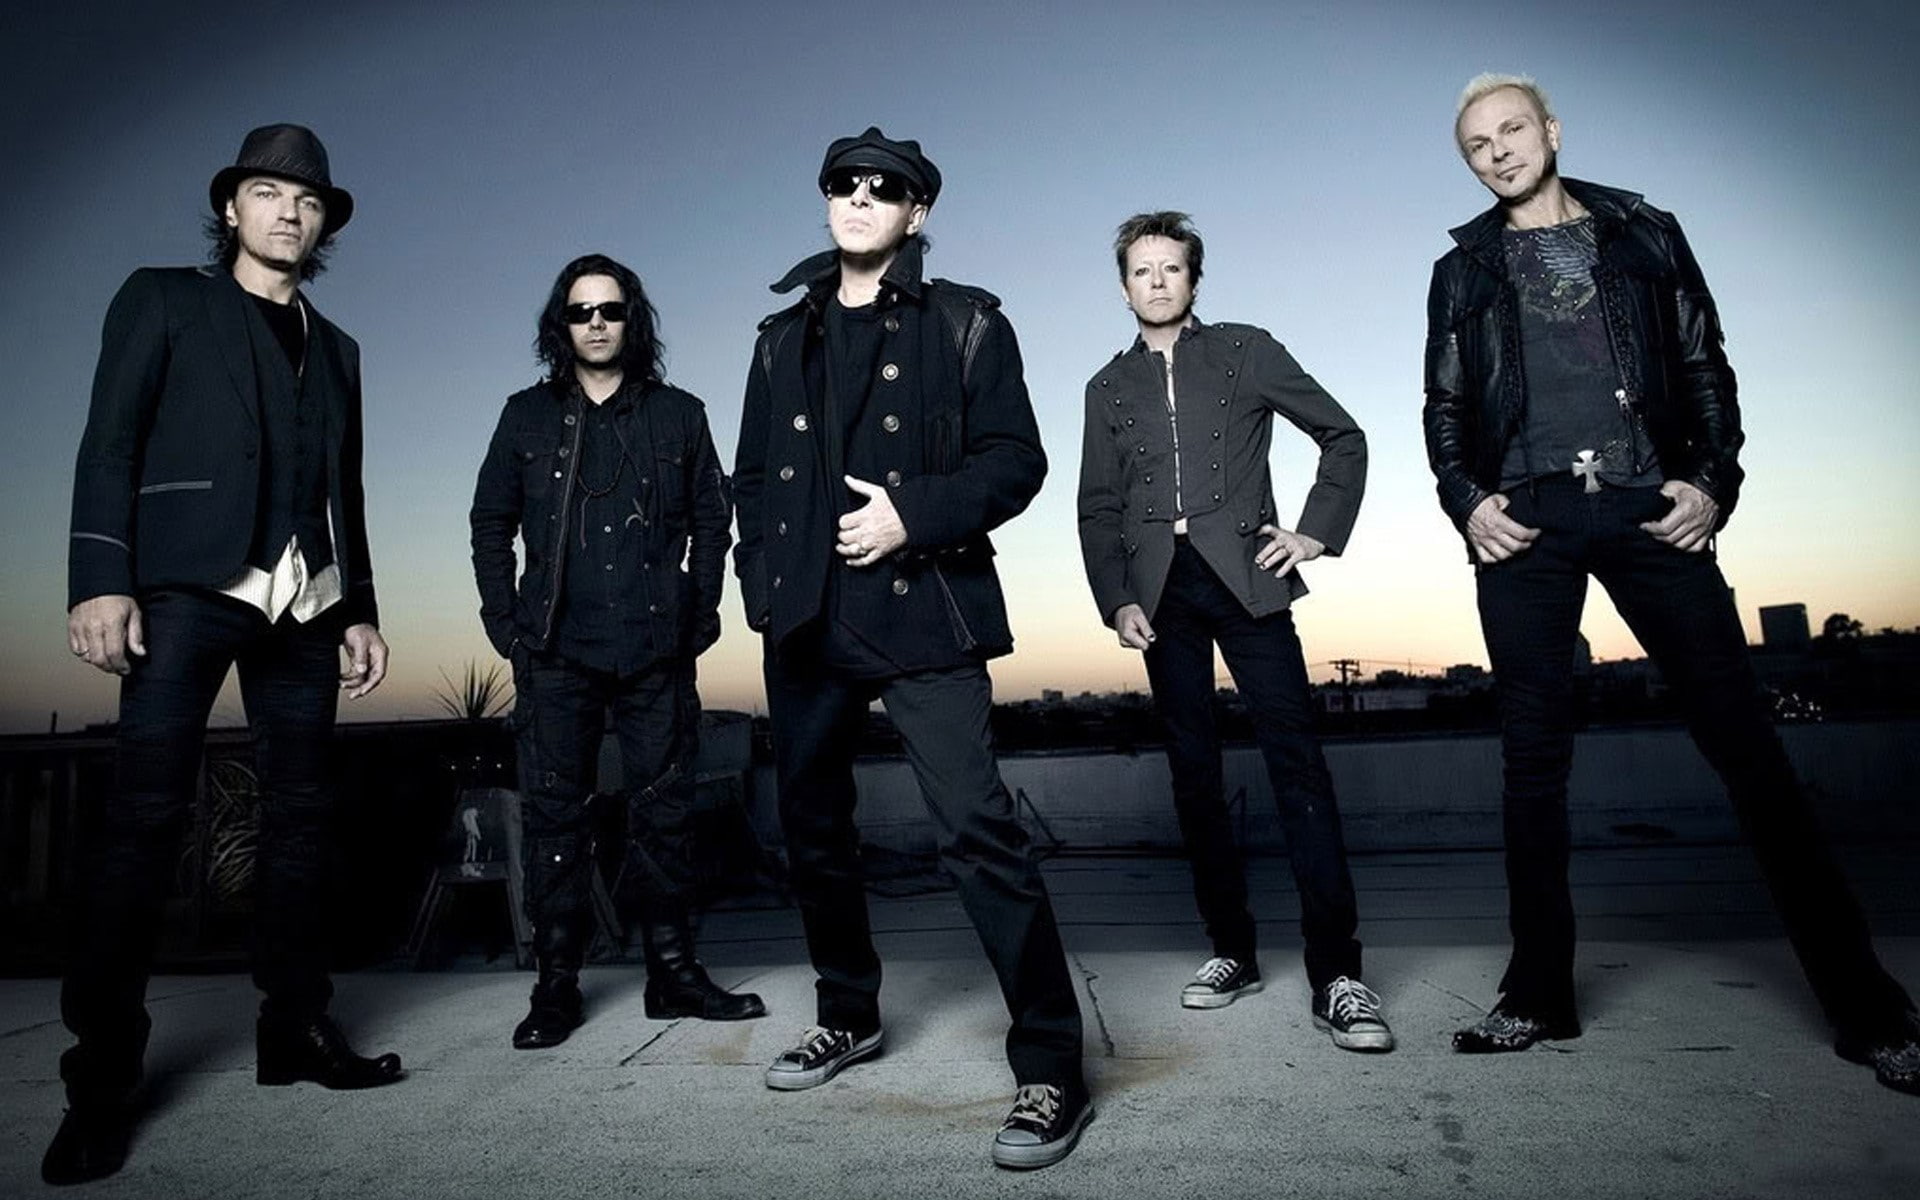 Scorpions, Band, Members, Sneakers, Sky, group of people, young adult